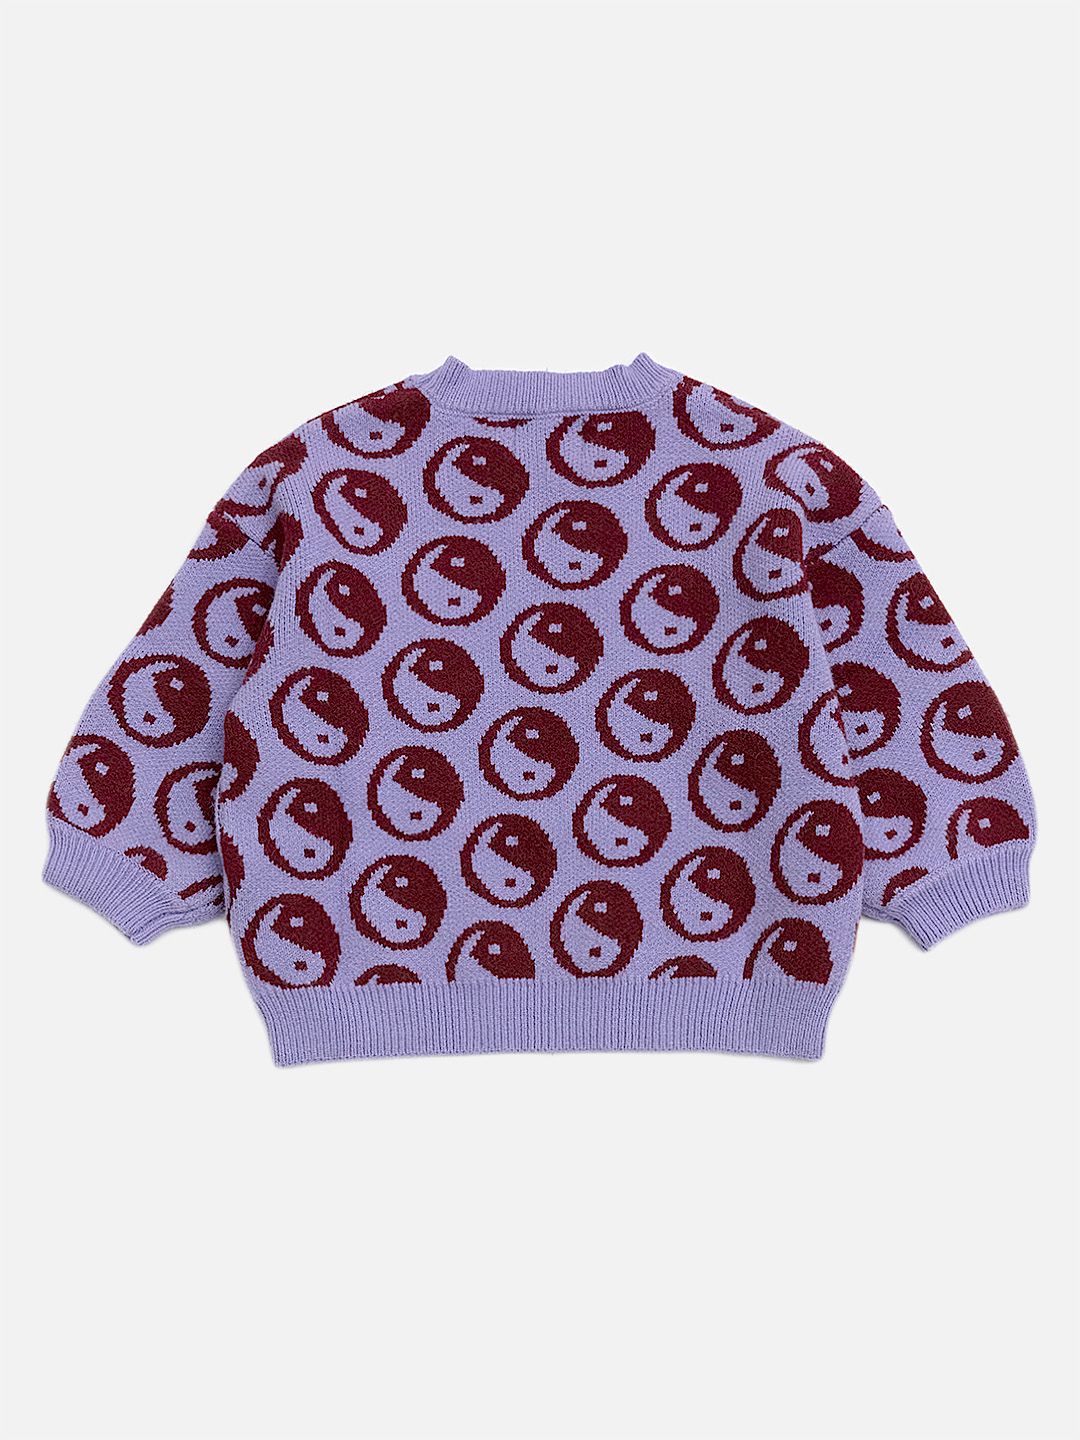 Violet | A kids' sweater with dark red yin and yang circles on a violet background, rear view